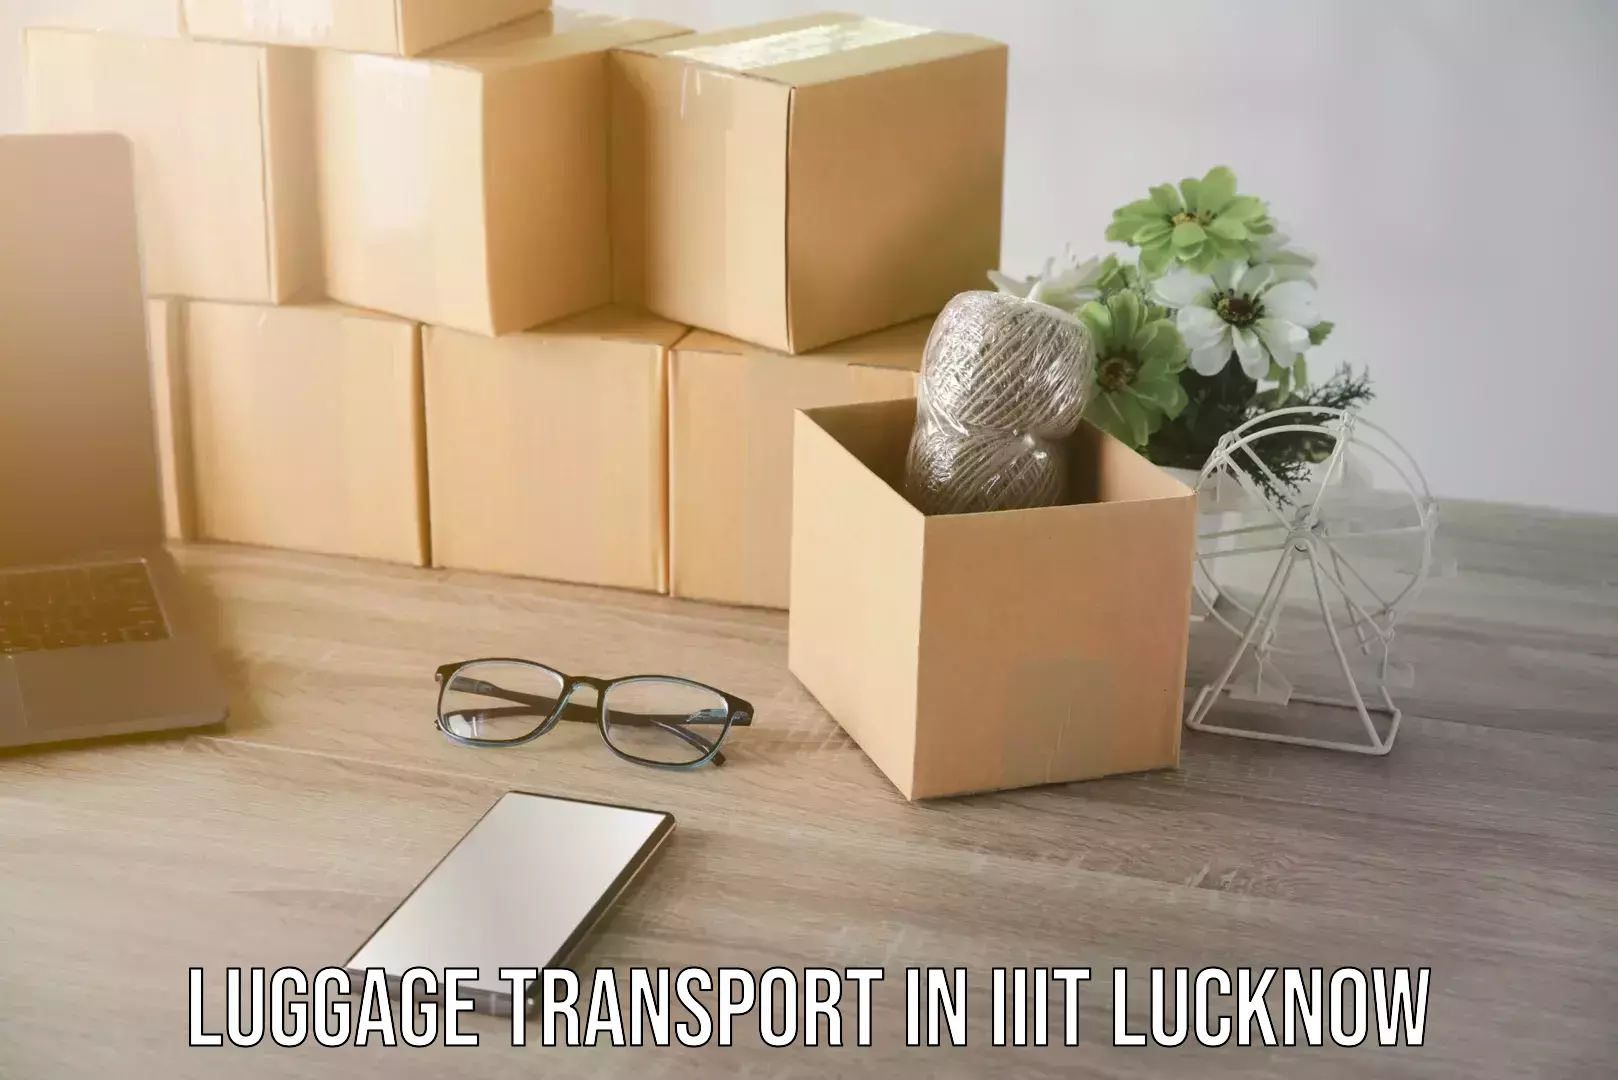 Luggage transport consulting in IIIT Lucknow